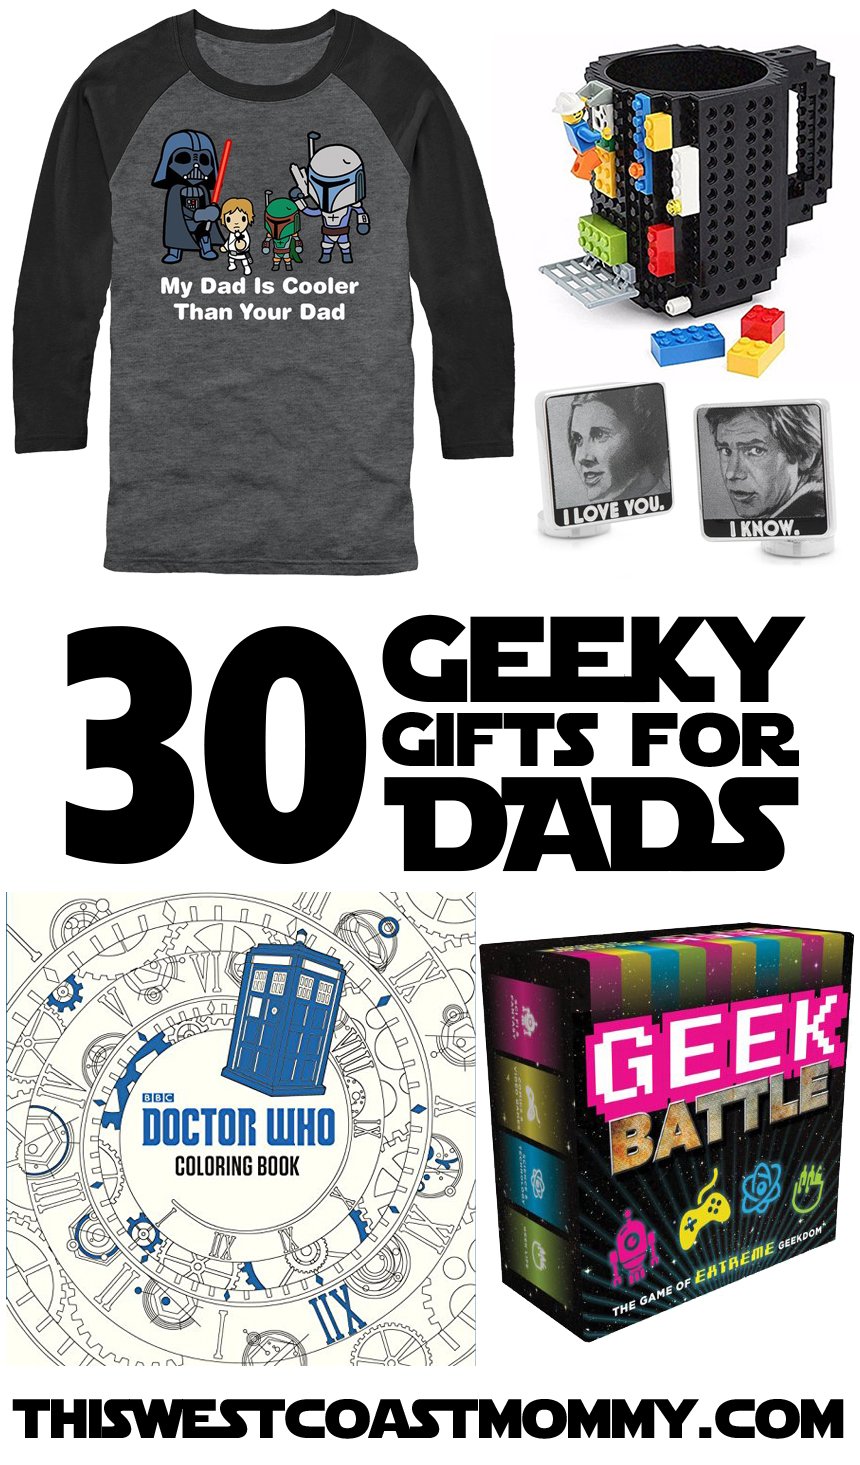 If you’ve got a geek dad in your life – a Star Wars vs. Star Trek debating, science fiction reading, fantasy movie watching, comic book collecting, video game playing, science loving dad – this gift guide is for you.